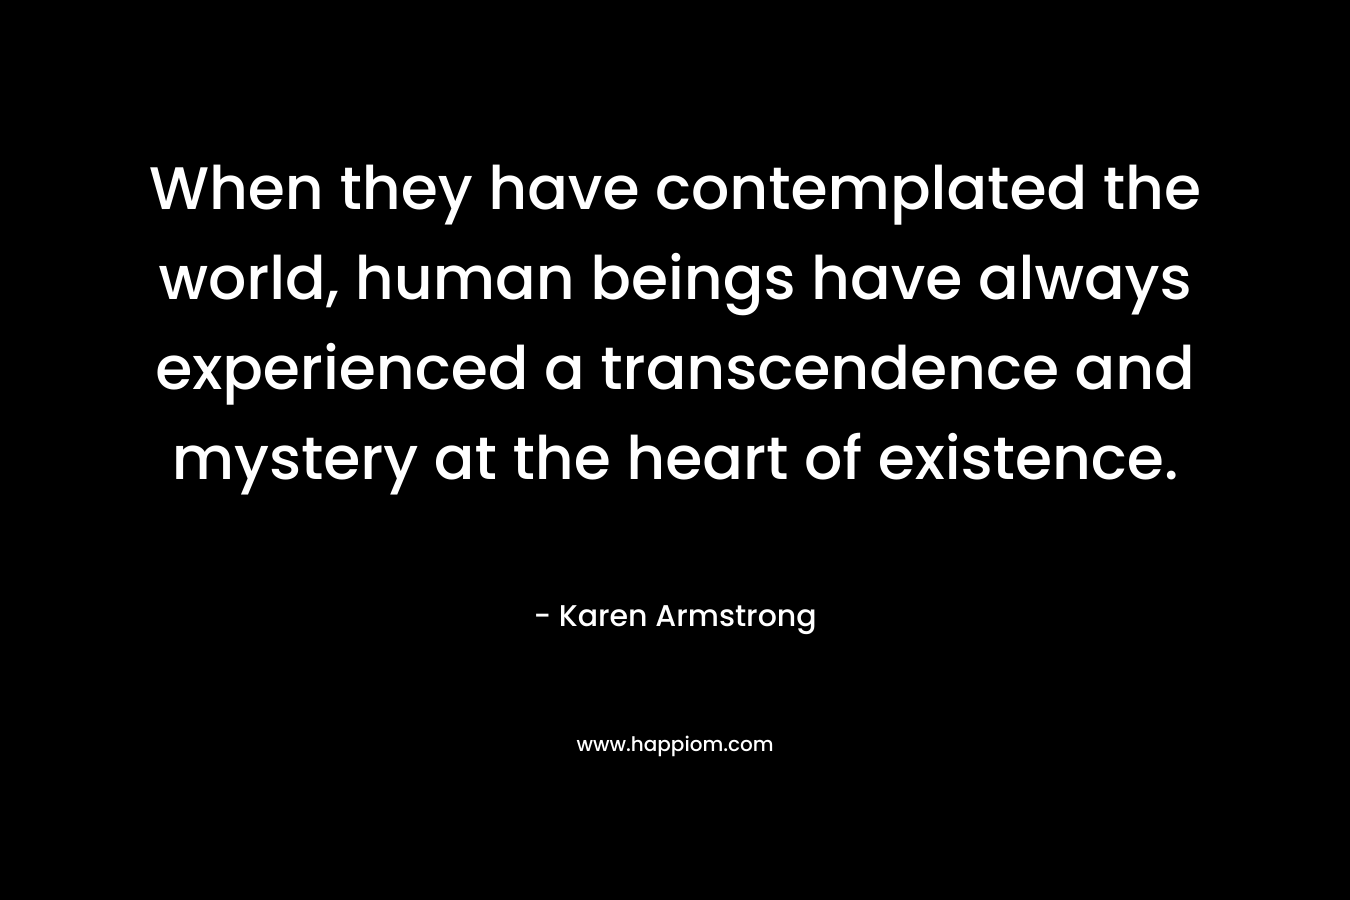 When they have contemplated the world, human beings have always experienced a transcendence and mystery at the heart of existence. – Karen Armstrong